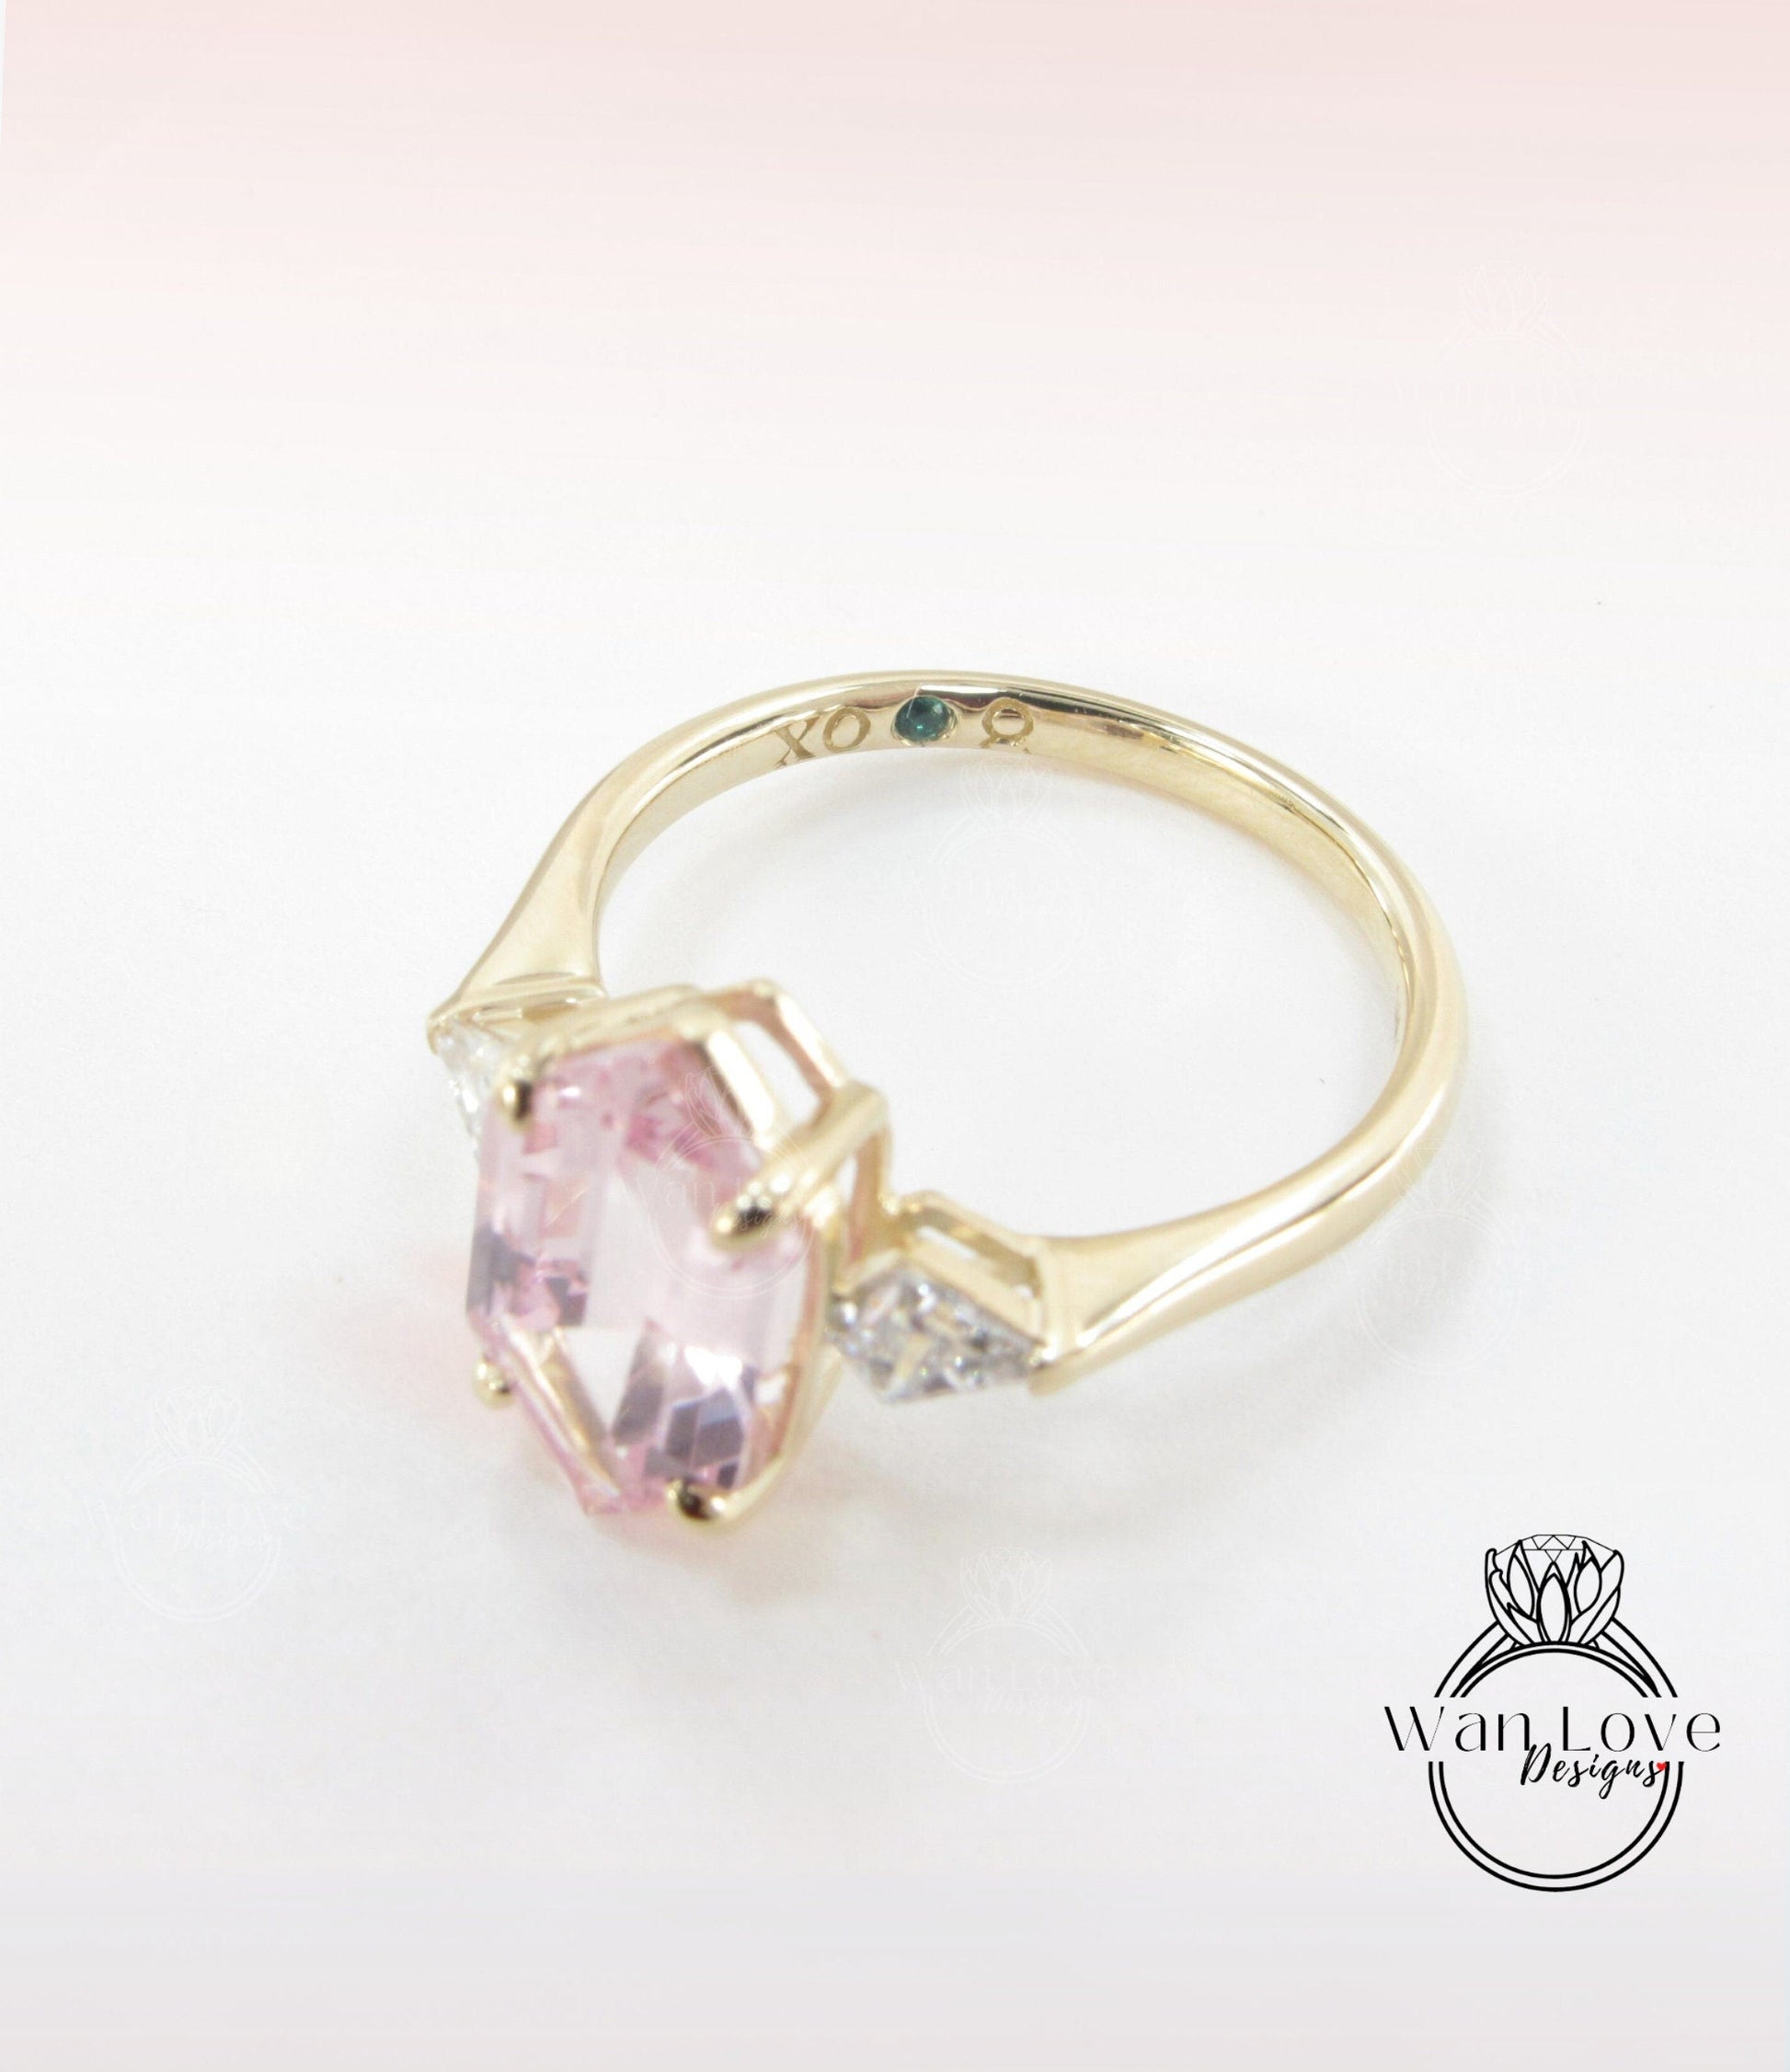 Personalize your Ring with a Custom Secret Birthstone or Special Gem or multiple gems Diamond Sapphire Emerald Ruby~Ask for a Custom Listing Wan Love Designs